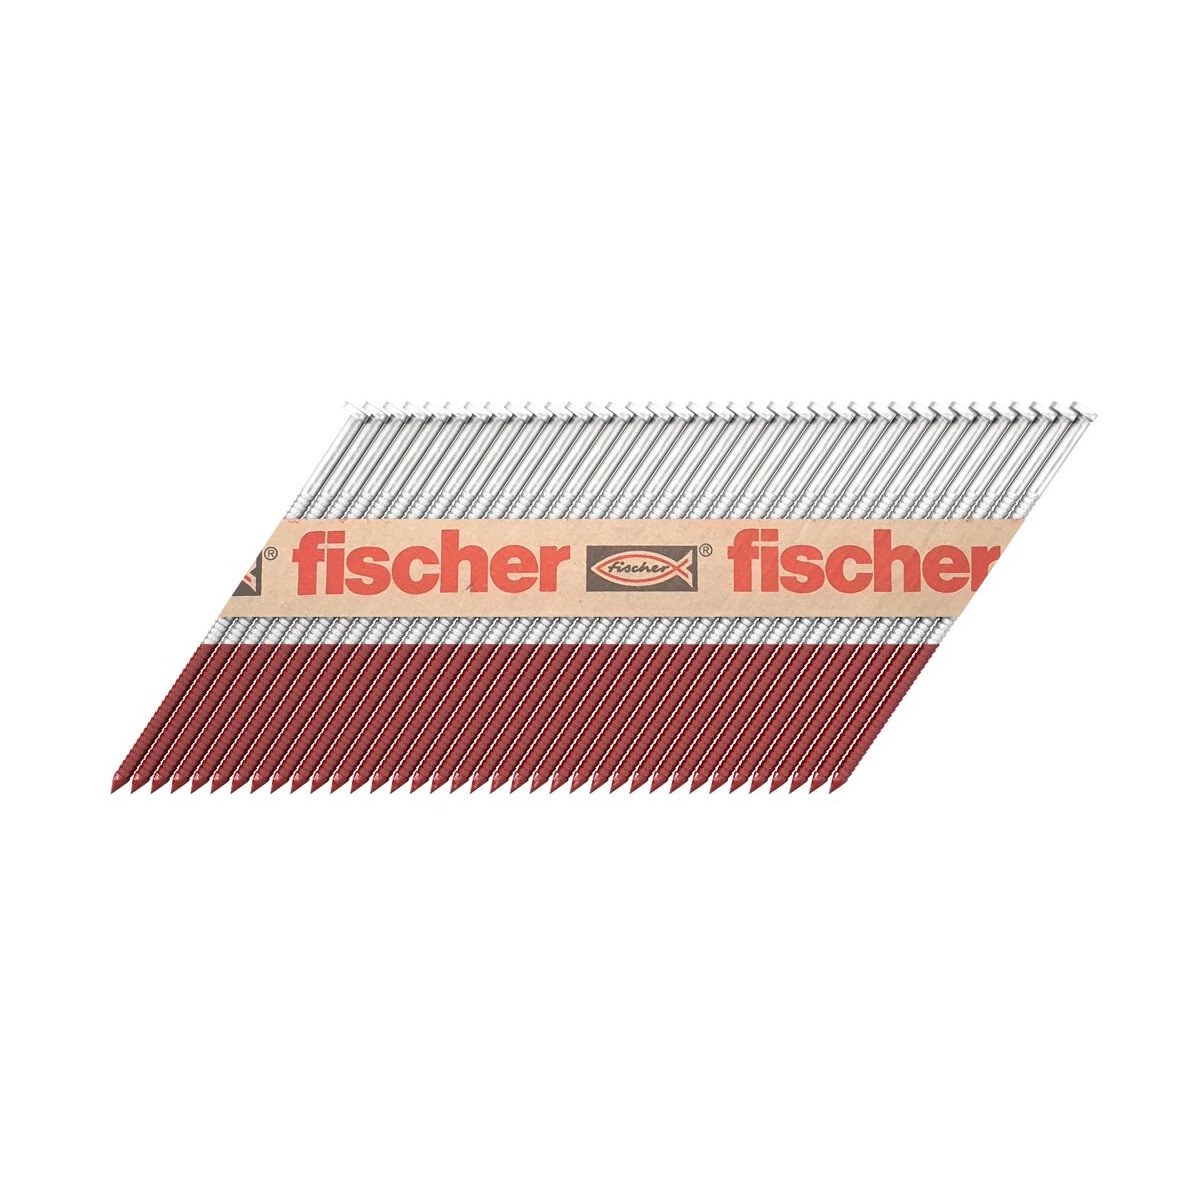 Fischer FF NFP 75x3.1mm Ring Galv 2200 N.G